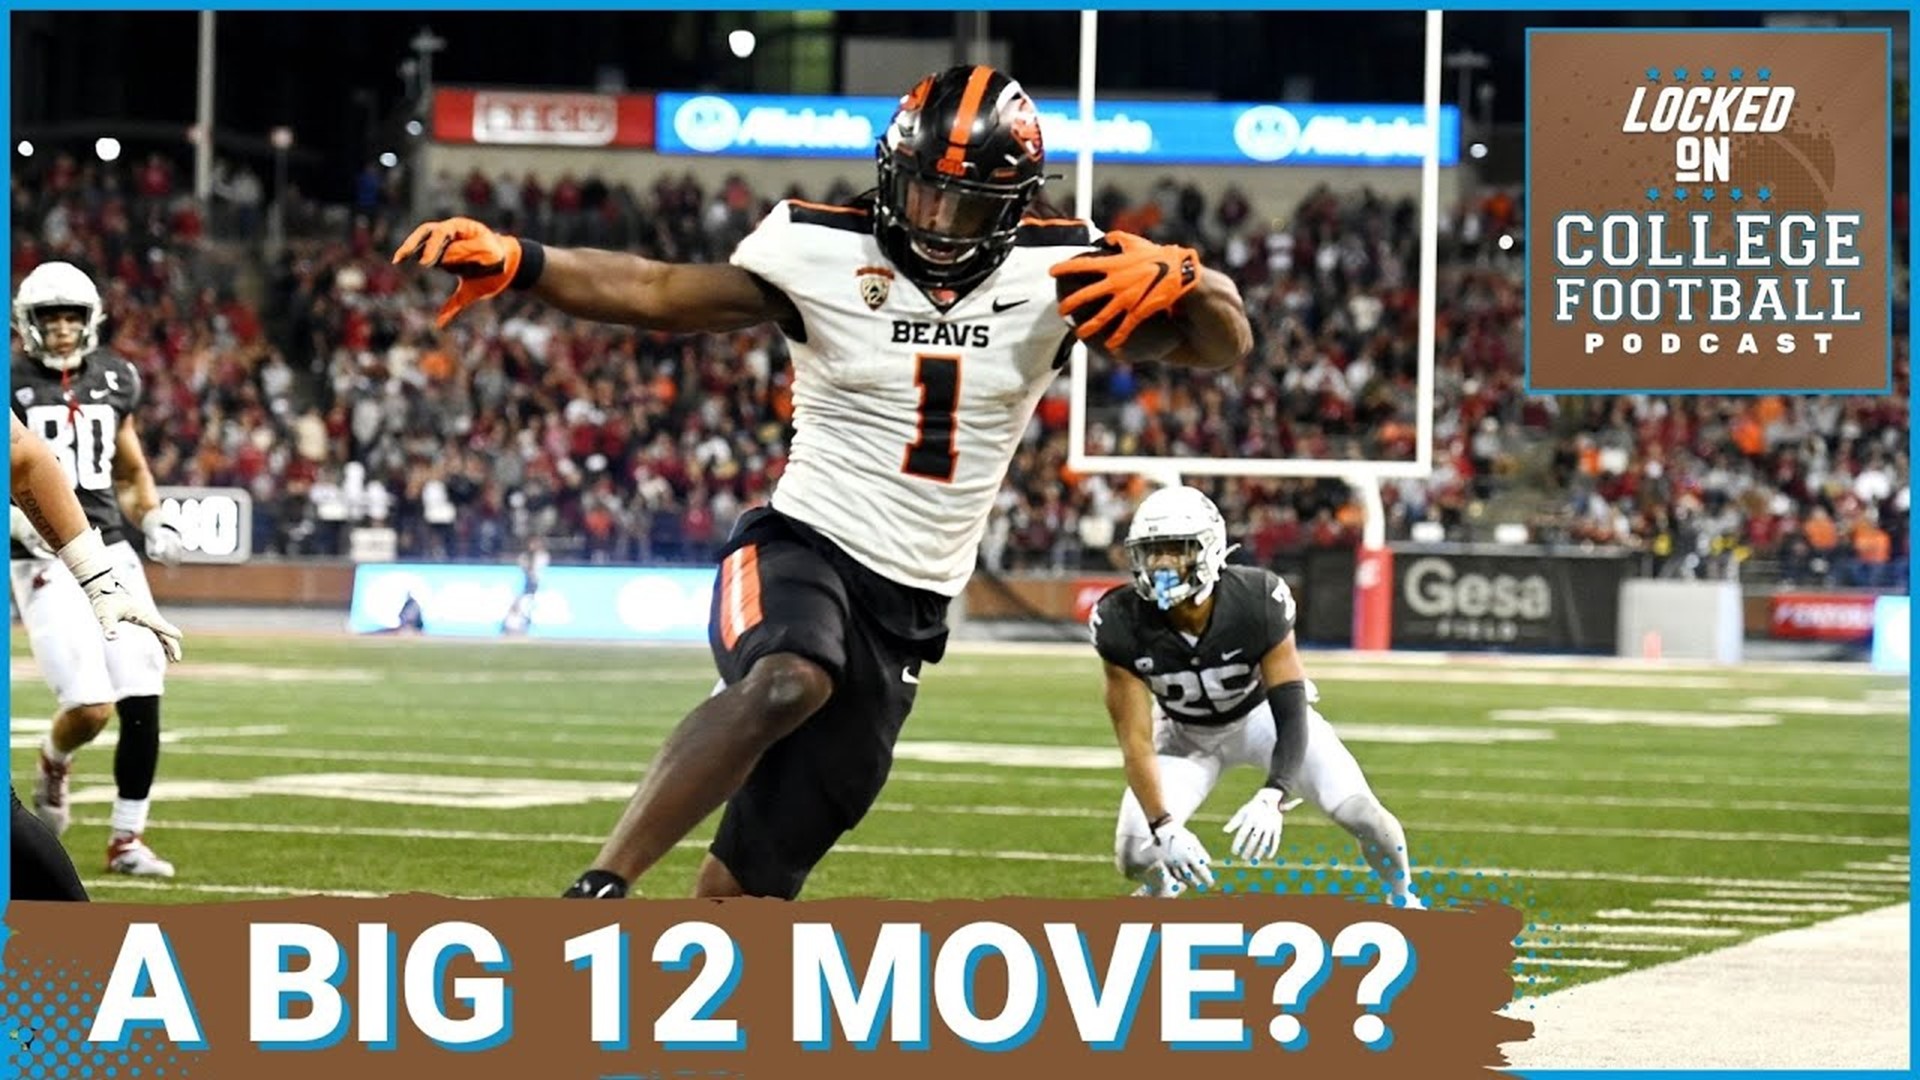 The transfer portal has been dominating the headlines, and Oregon State's nod towards the Big 12 has flown under the radar.